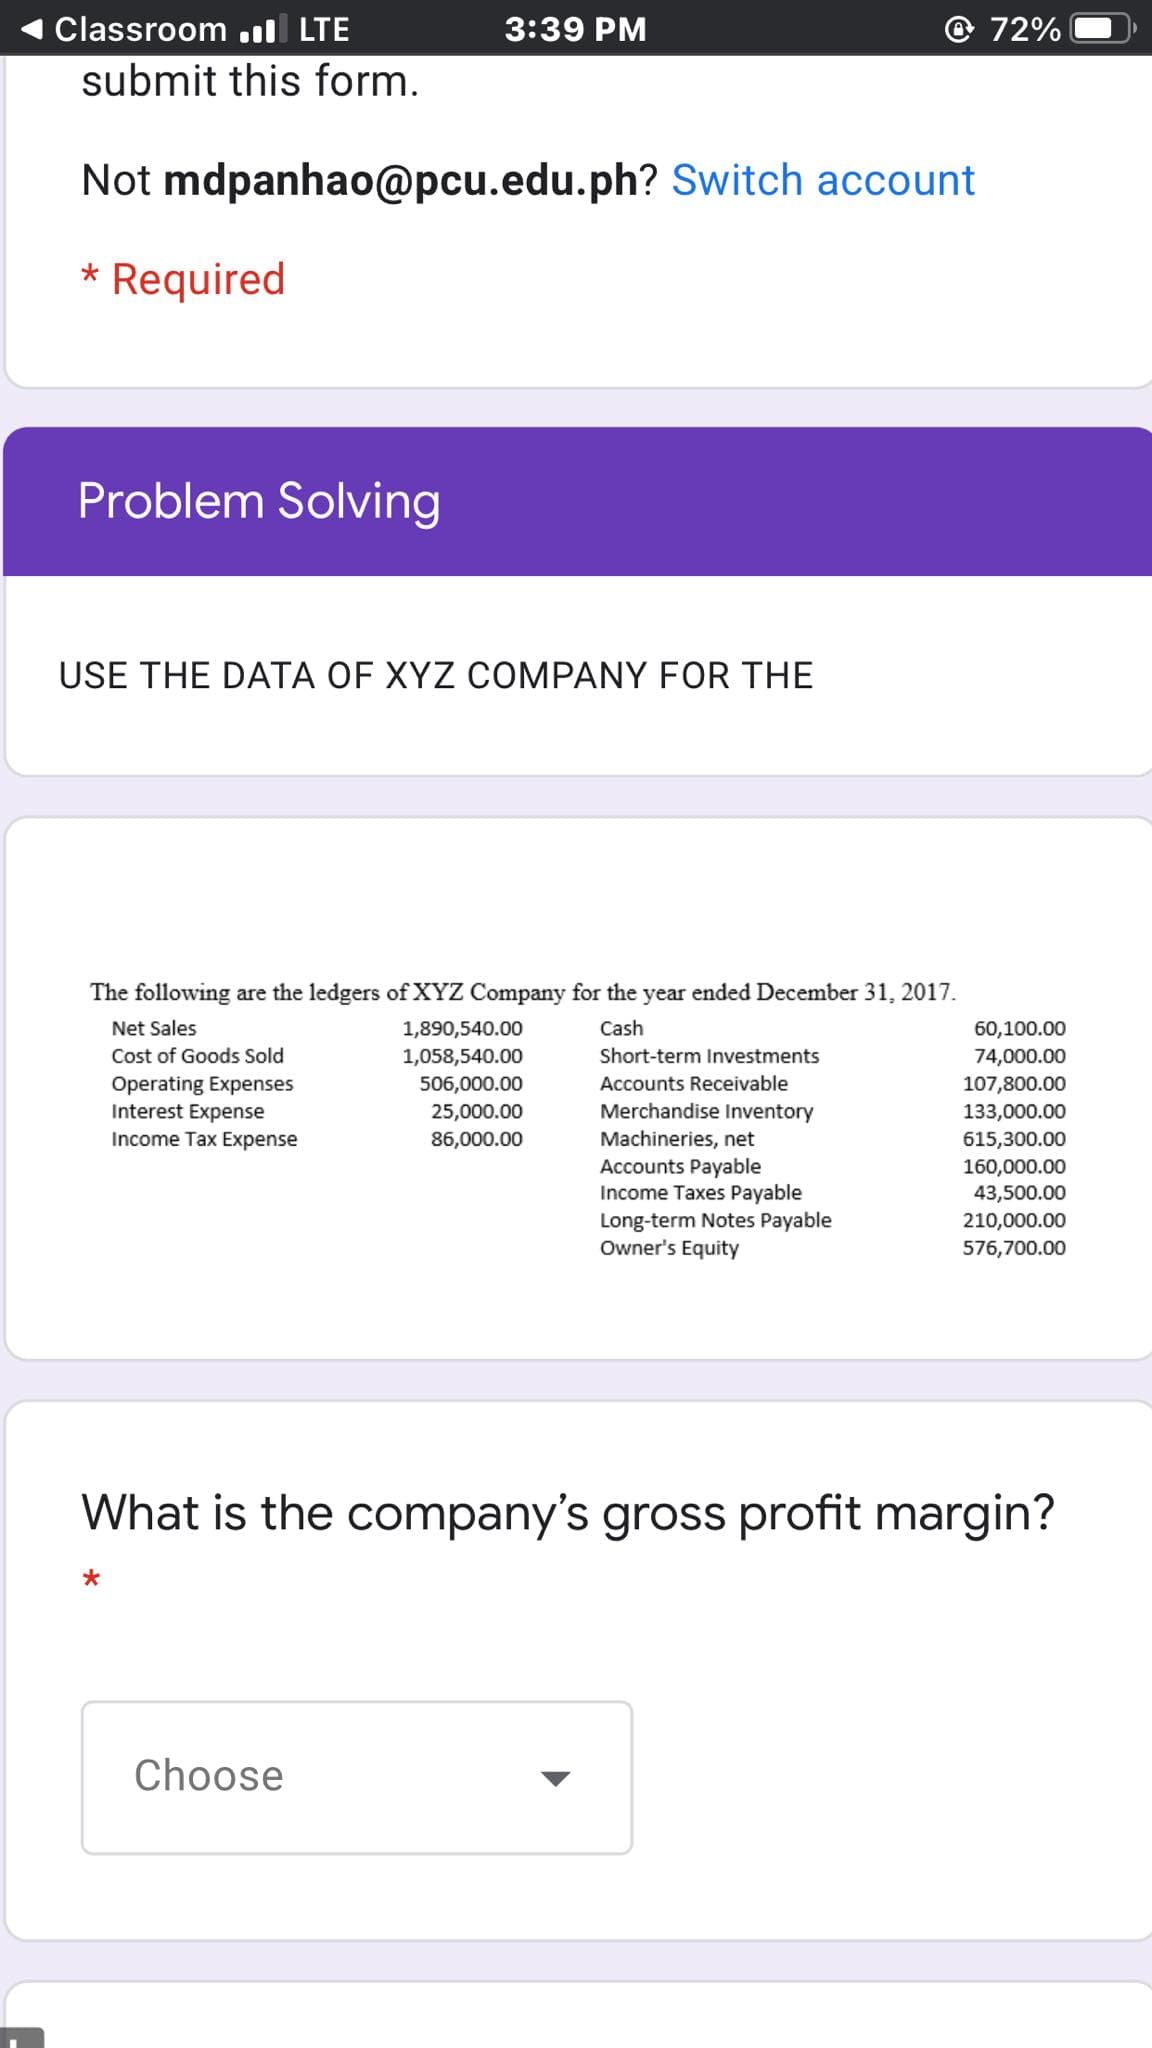 Classroom .ıl LTE
3:39 PM
72%
submit this form.
Not mdpanhao@pcu.edu.ph? Switch account
* Required
Problem Solving
USE THE DATA OF XYZ COMPANY FOR THE
The following are the ledgers of XYZ Company for the year ended December 31, 2017.
Net Sales
1,890,540.00
Cash
60,100.00
Cost of Goods Sold
1,058,540.00
Short-term Investments
74,000.00
Operating Expenses
Interest Expense
Income Tax Expense
506,000.00
Accounts Receivable
107,800.00
25,000.00
Merchandise Inventory
133,000.00
Machineries, net
Accounts Payable
Income Taxes Payable
86,000.00
615,300.00
160,000.00
43,500.00
210,000.00
Long-term Notes Payable
Owner's Equity
576,700.00
What is the company's gross profit margin?
Choose
